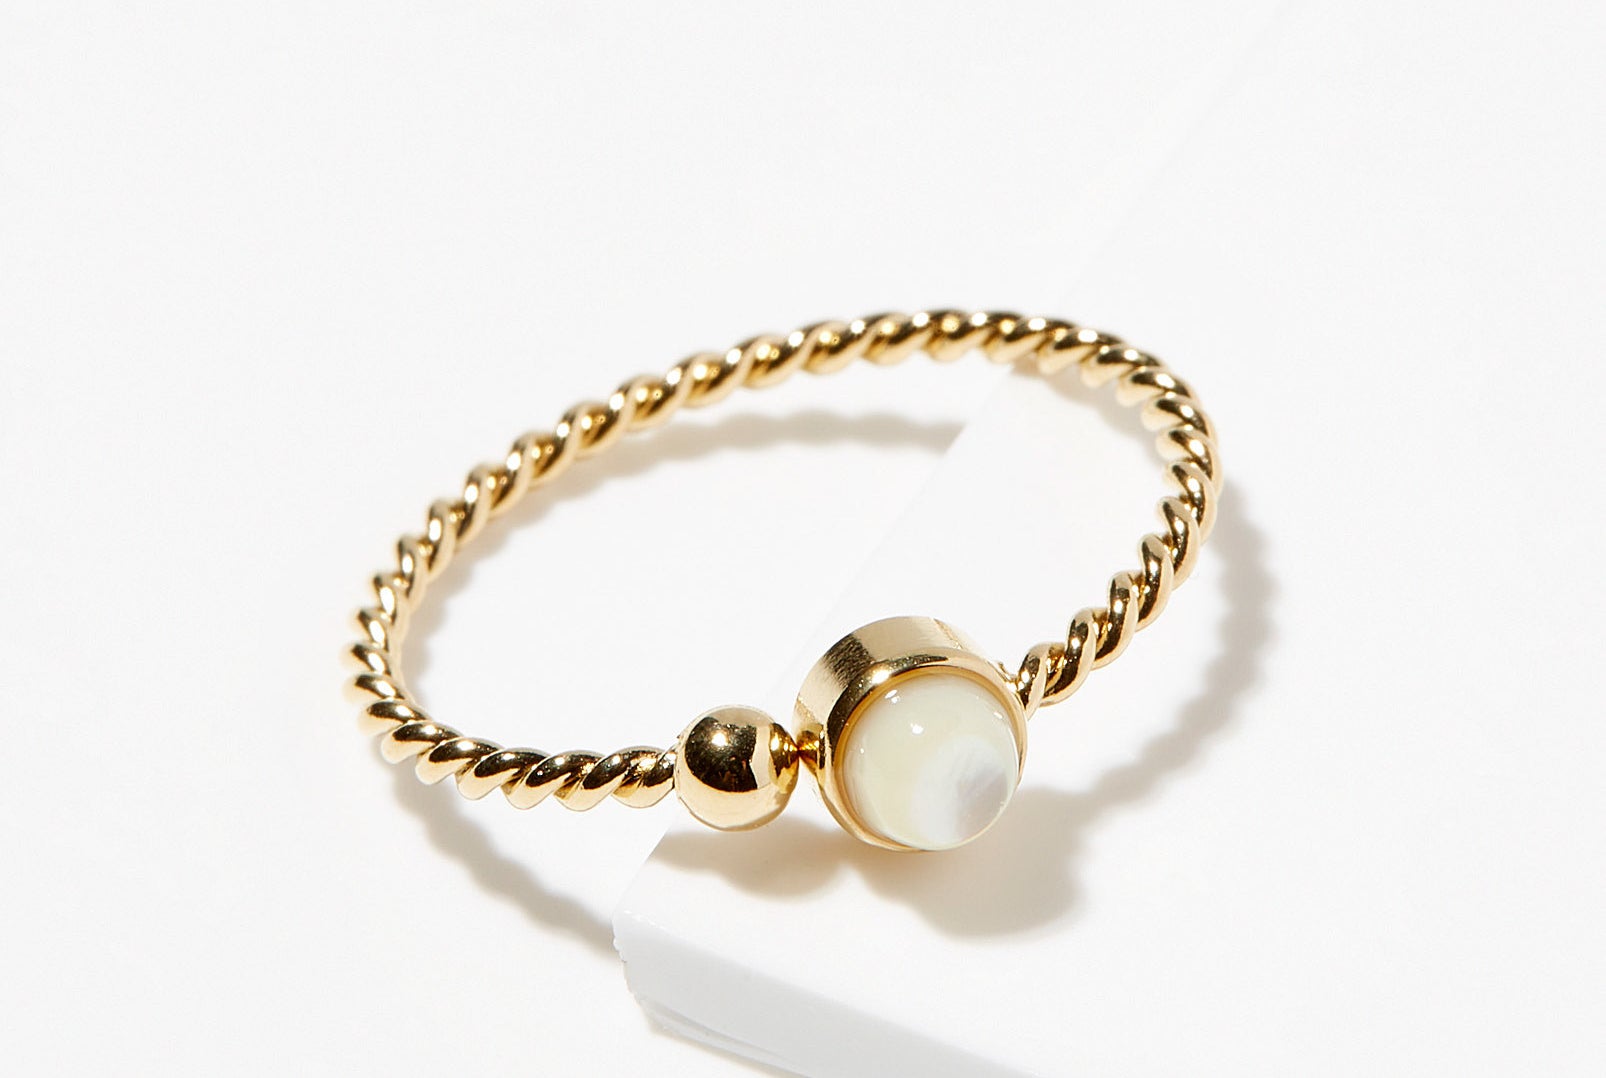 A ring with a pearl stone